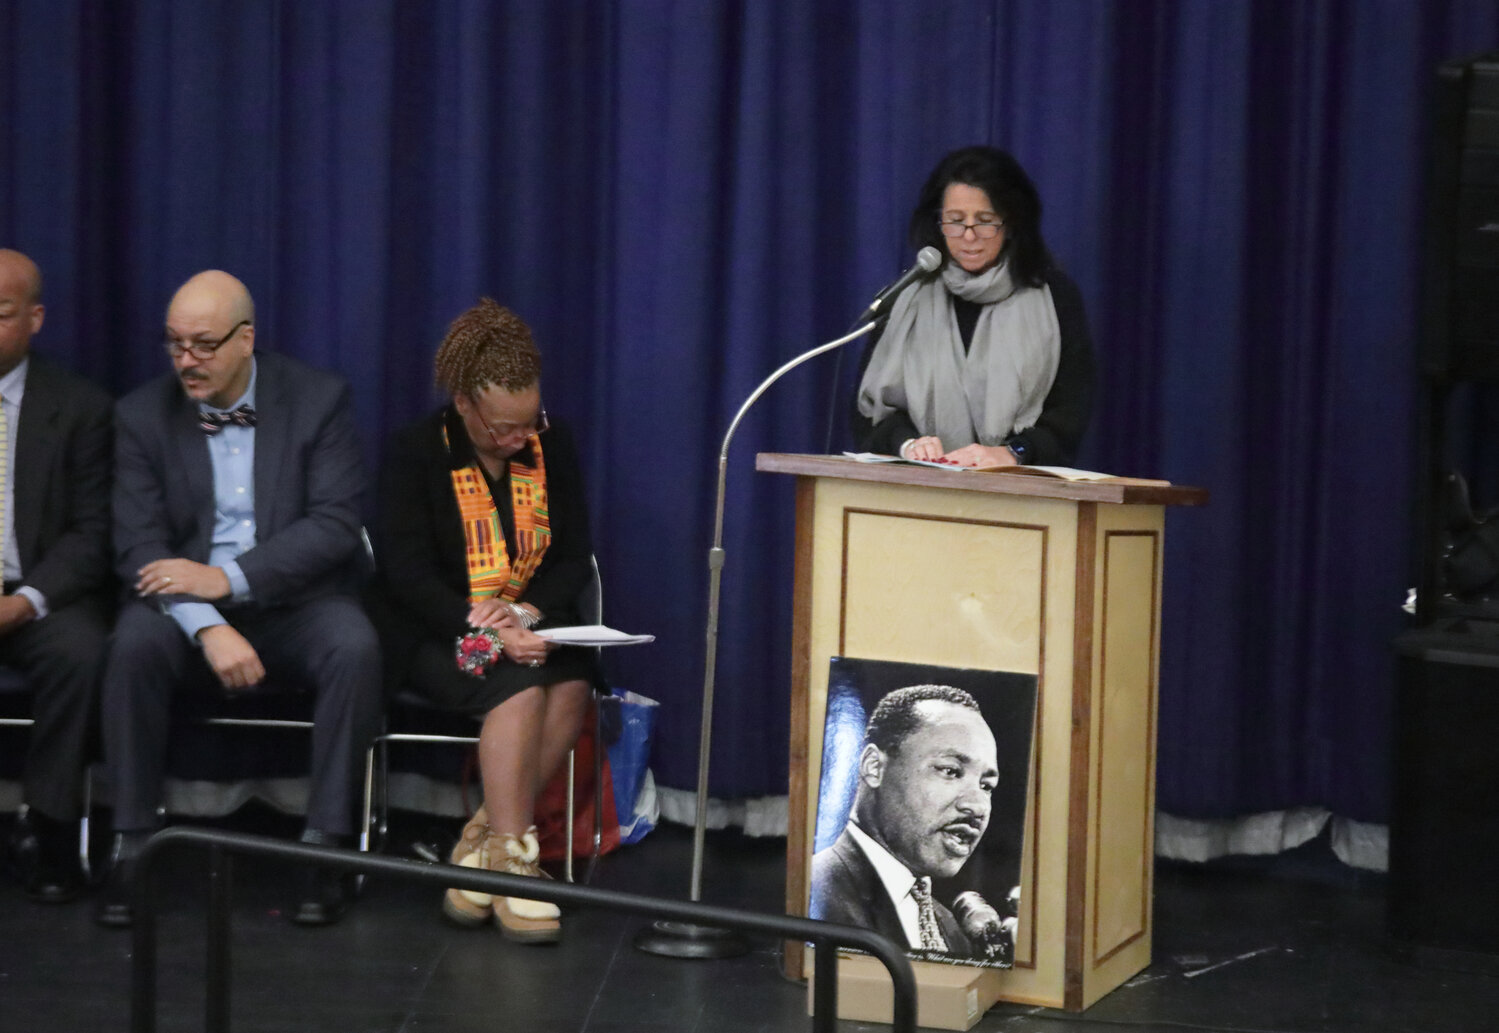 Maria Rianna spoke about the day’s significance, and the importance of continuing to celebrate King’s legacy.